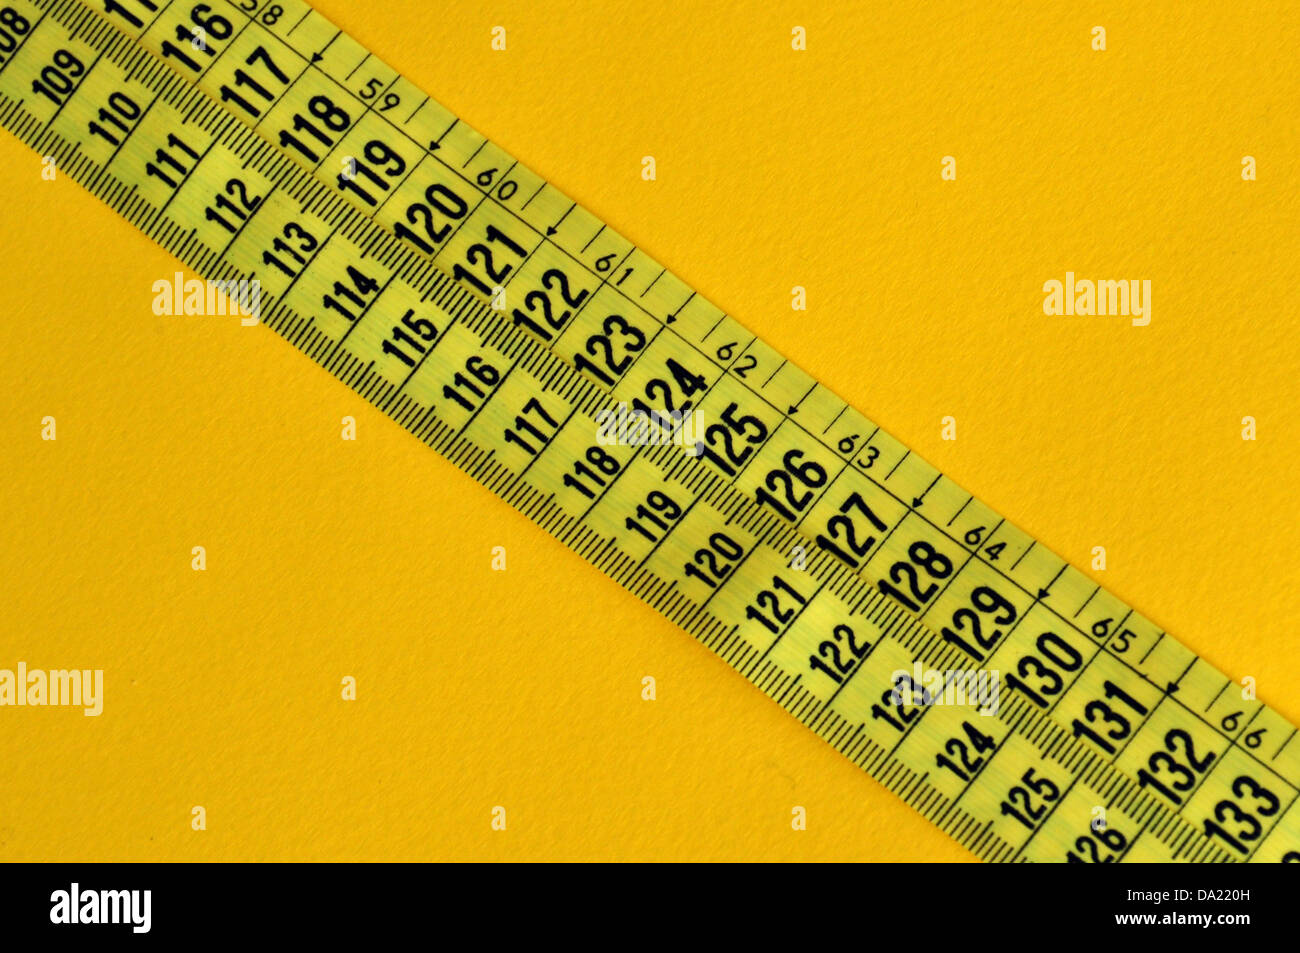 Plastic tape measure inches and centimeters. Abstract numbers yellow background. Stock Photo